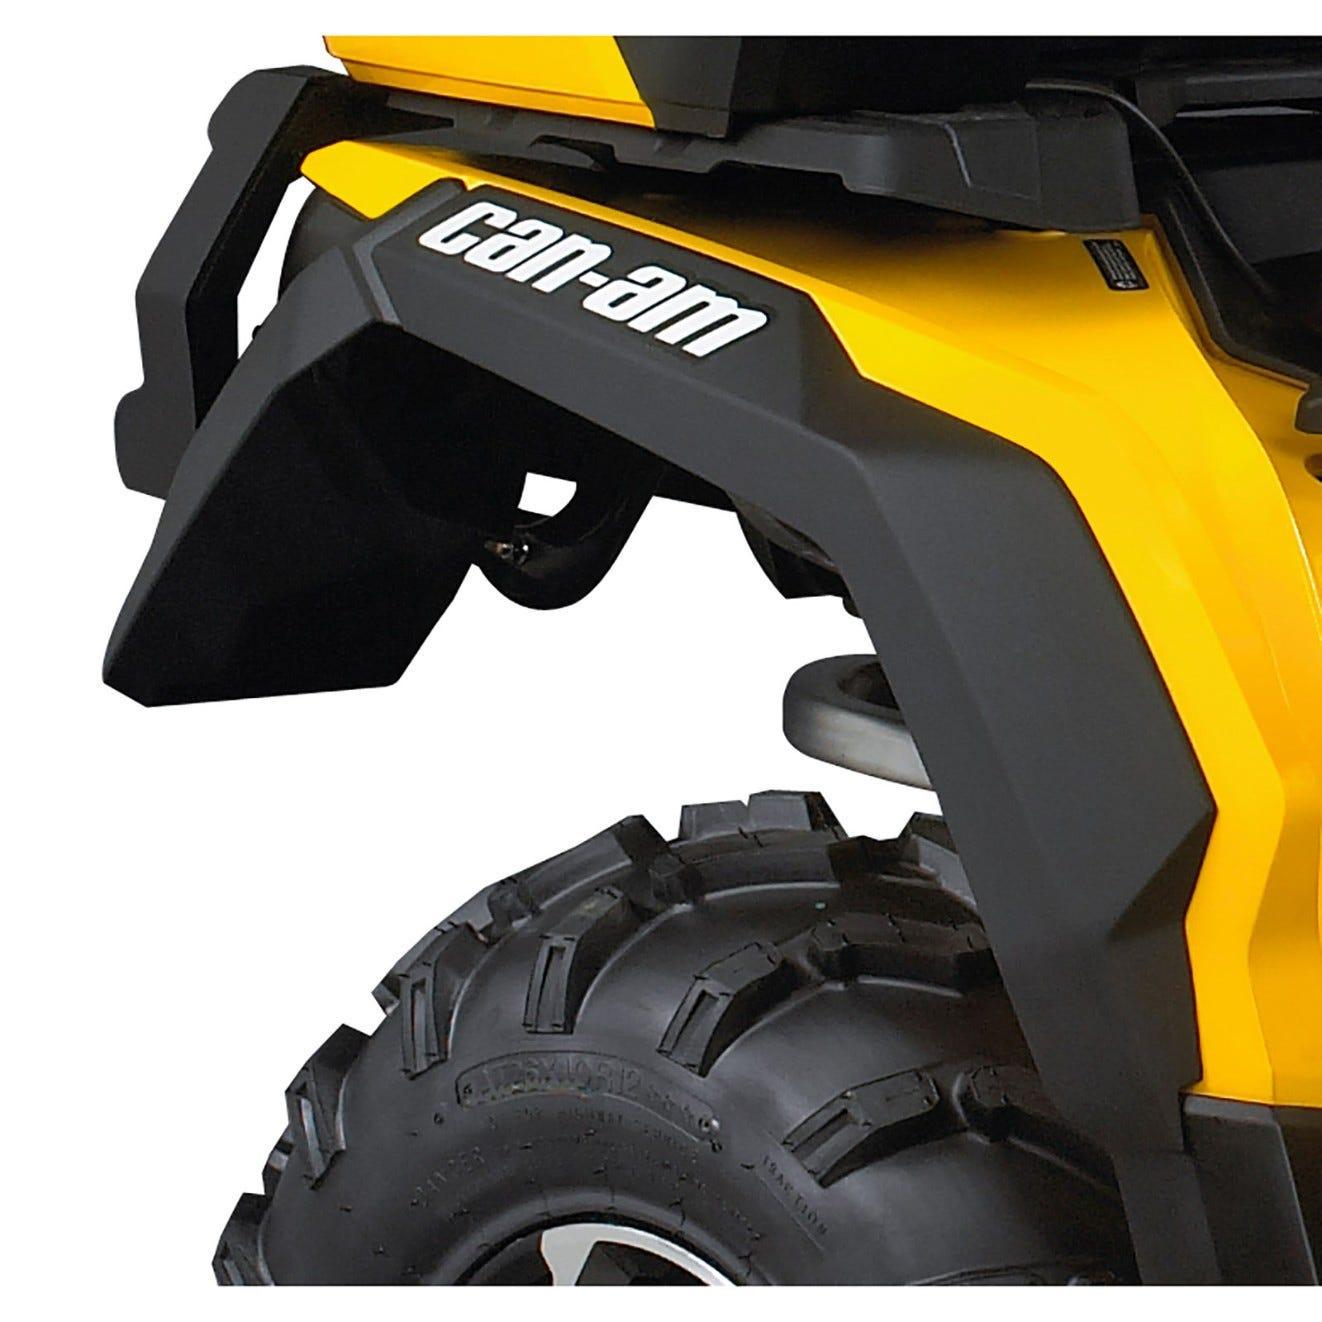 Shop Can-Am ATV Protection at Factory Recreation | Factory Recreation